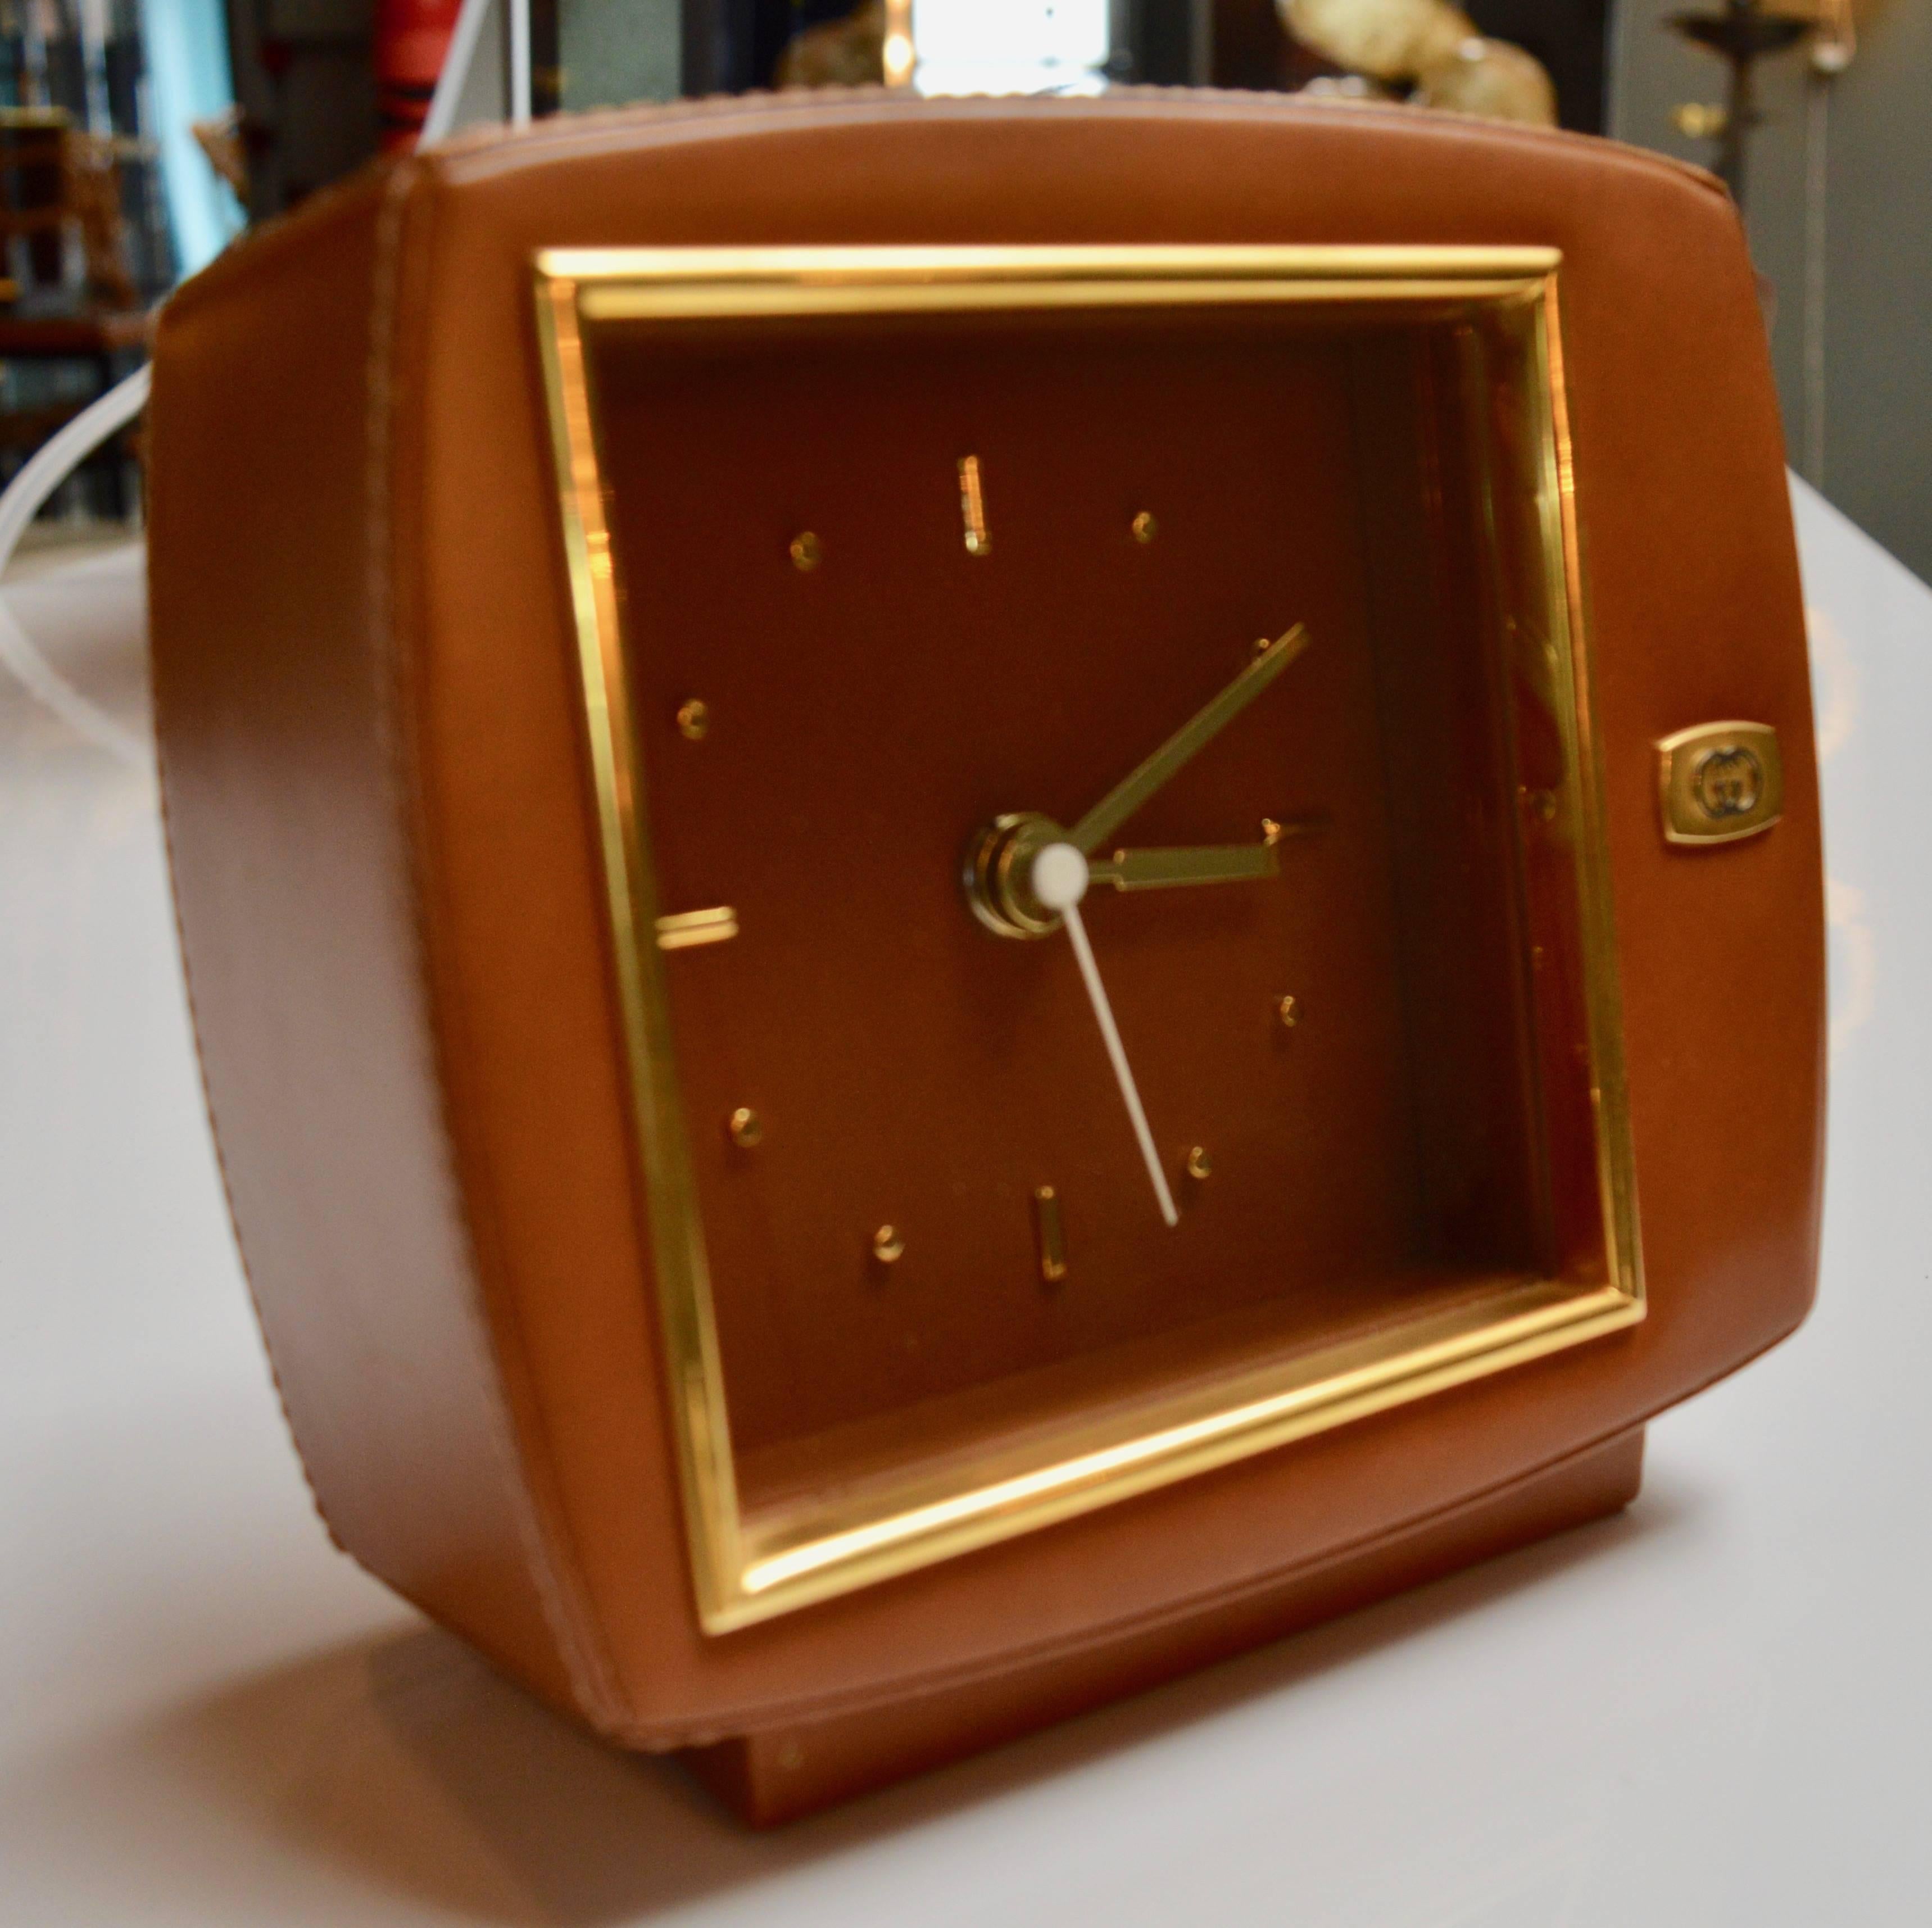 Gorgeous leather and brass table clock by Gucci. Great age and color to leather. Brass in excellent condition. Clock is in great working order. Double G brass logo on front. Gucci Italy label on bottom. Excellent condition overall.